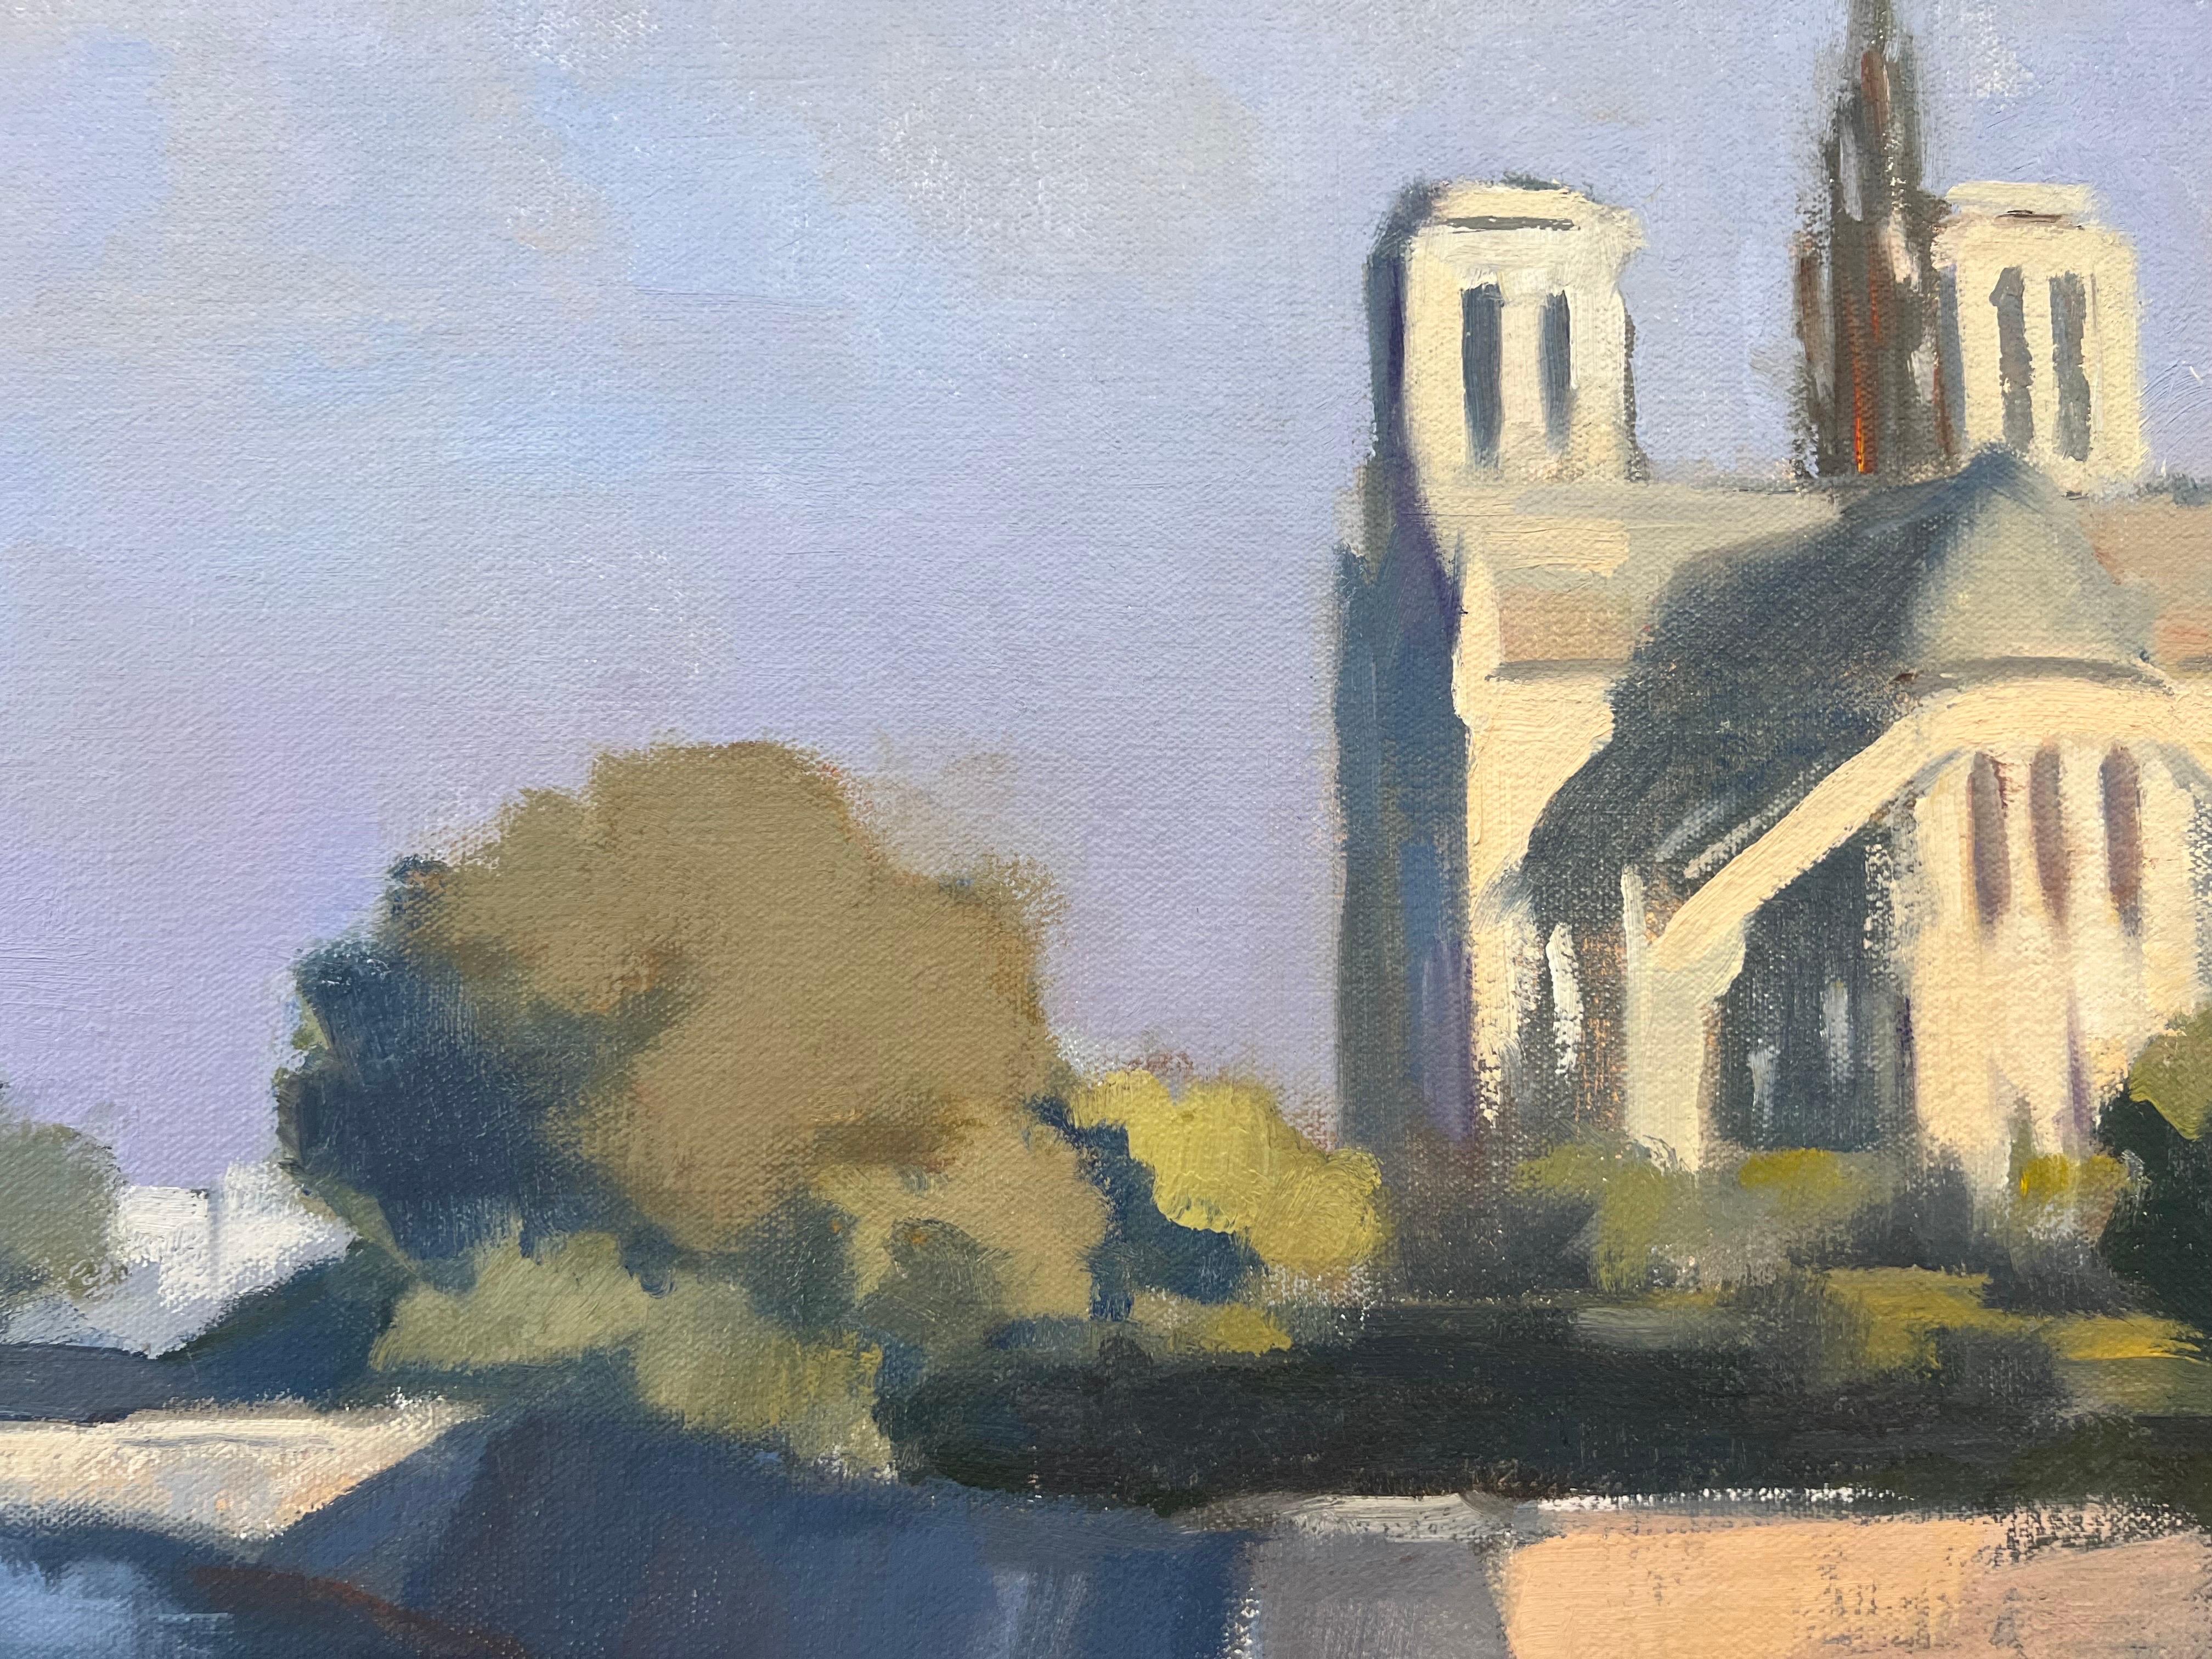 Reflections of Notre Dame by Lesley Powell, Oil on Canvas Parisian Scene 2